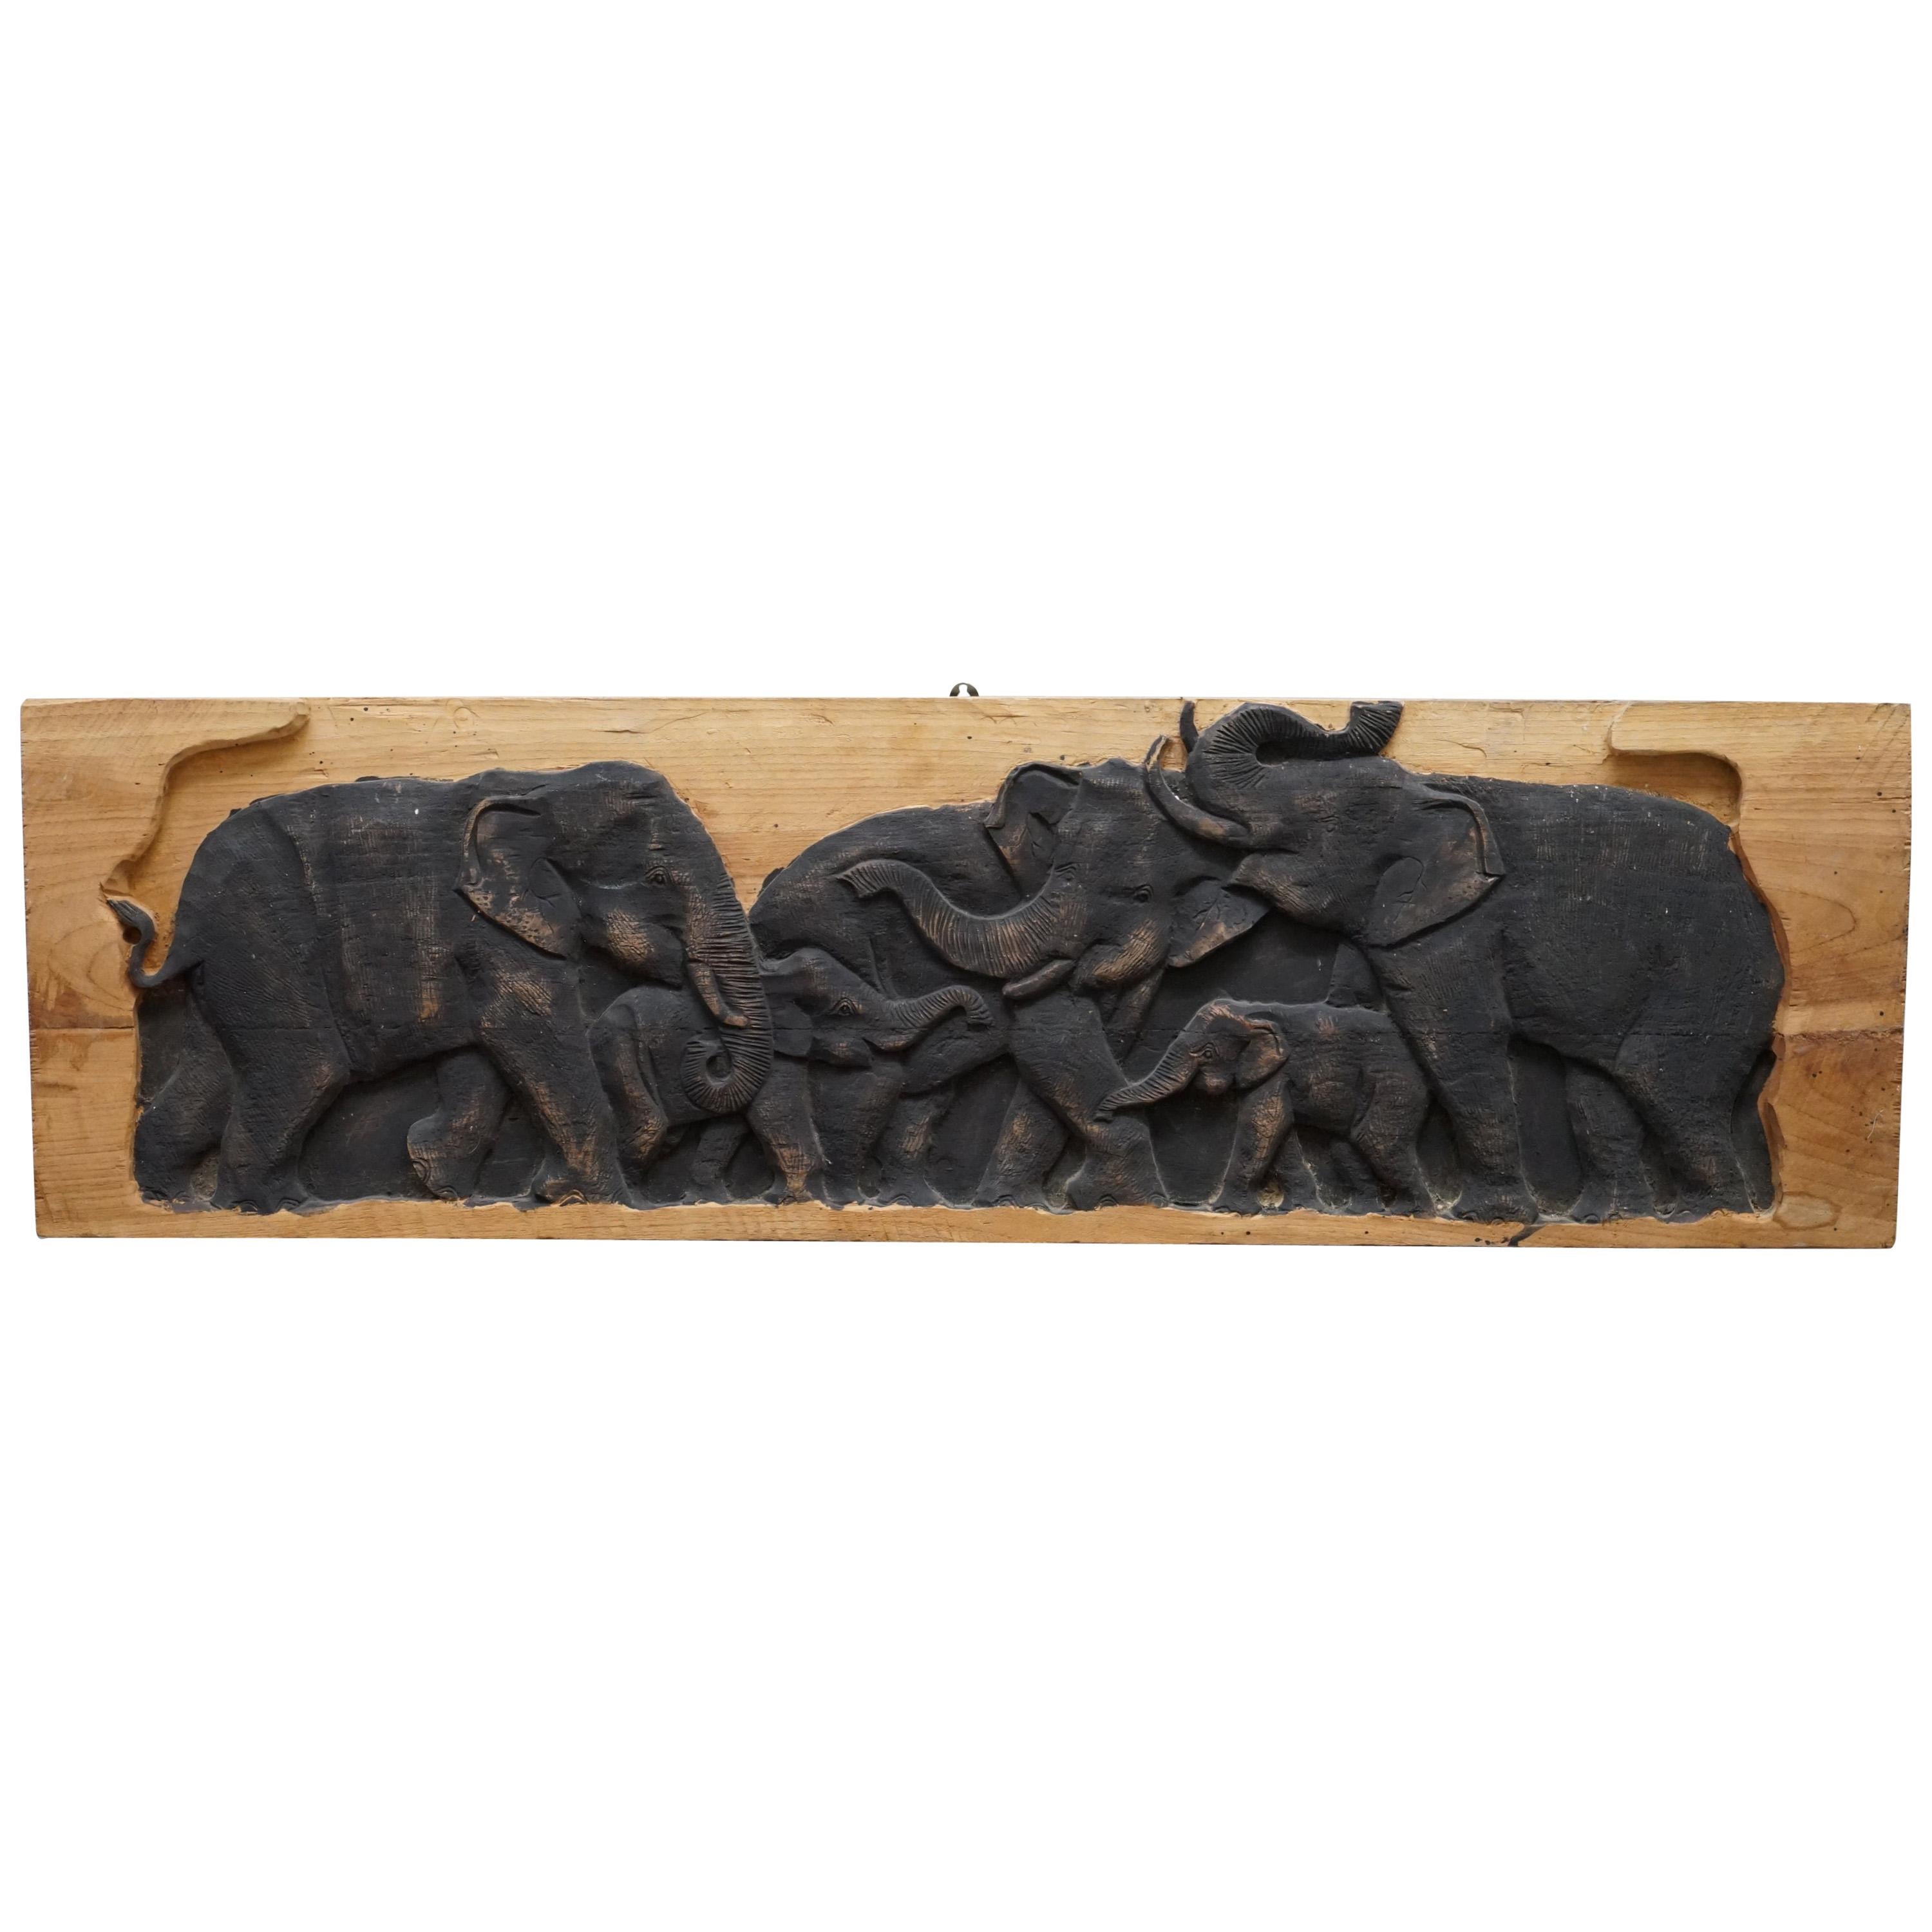 Lovely Vintage Carved Wood Display Depicting a Herd of Elephants, circa 1960s